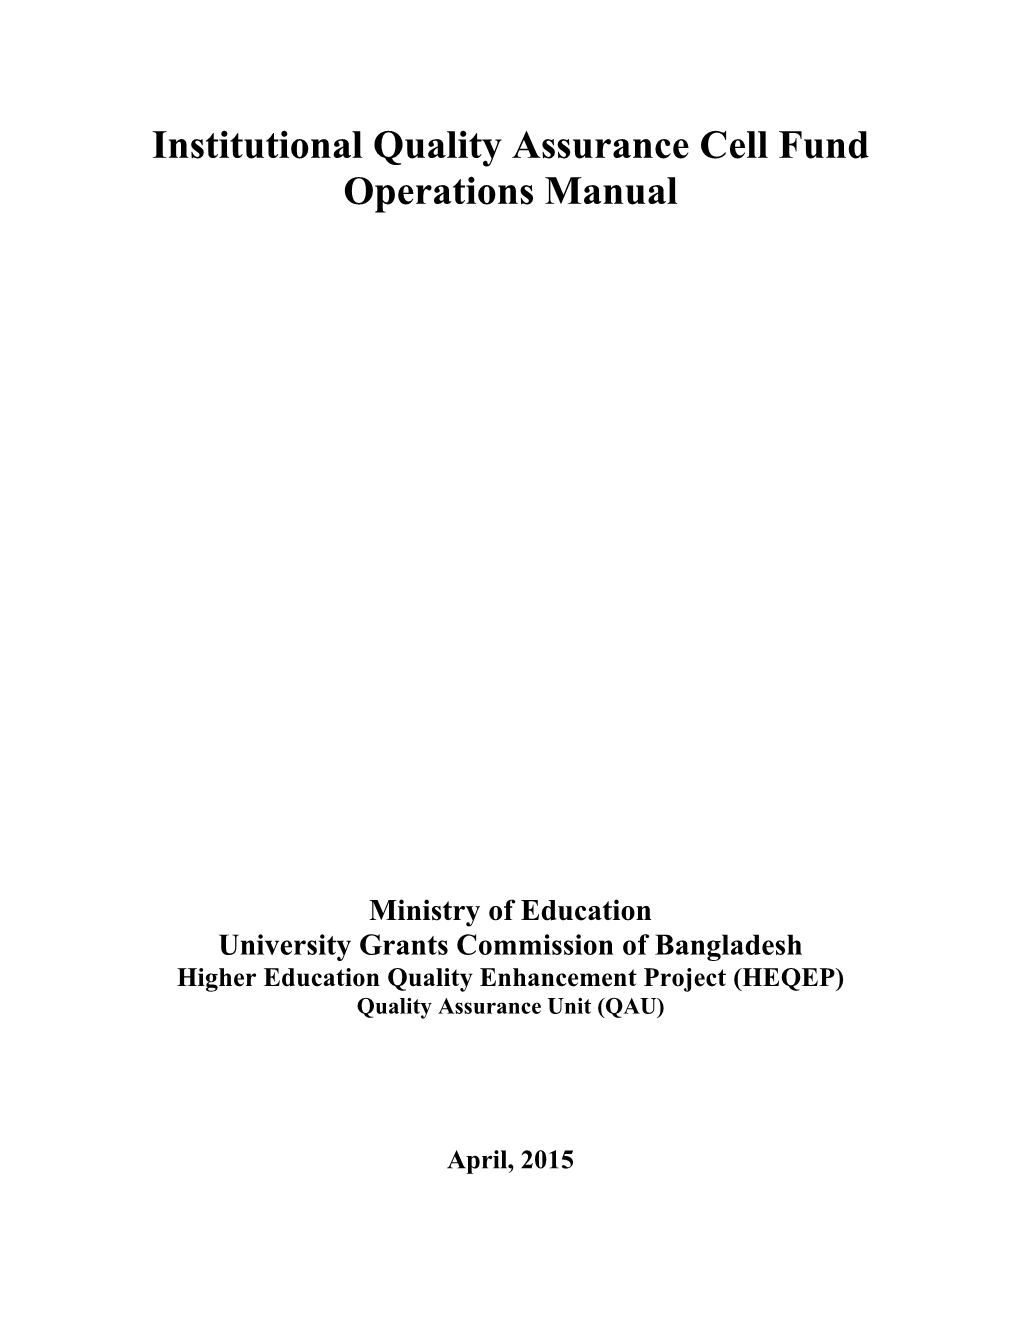 Institutional Quality Assurance Cell Fund Operations Manual